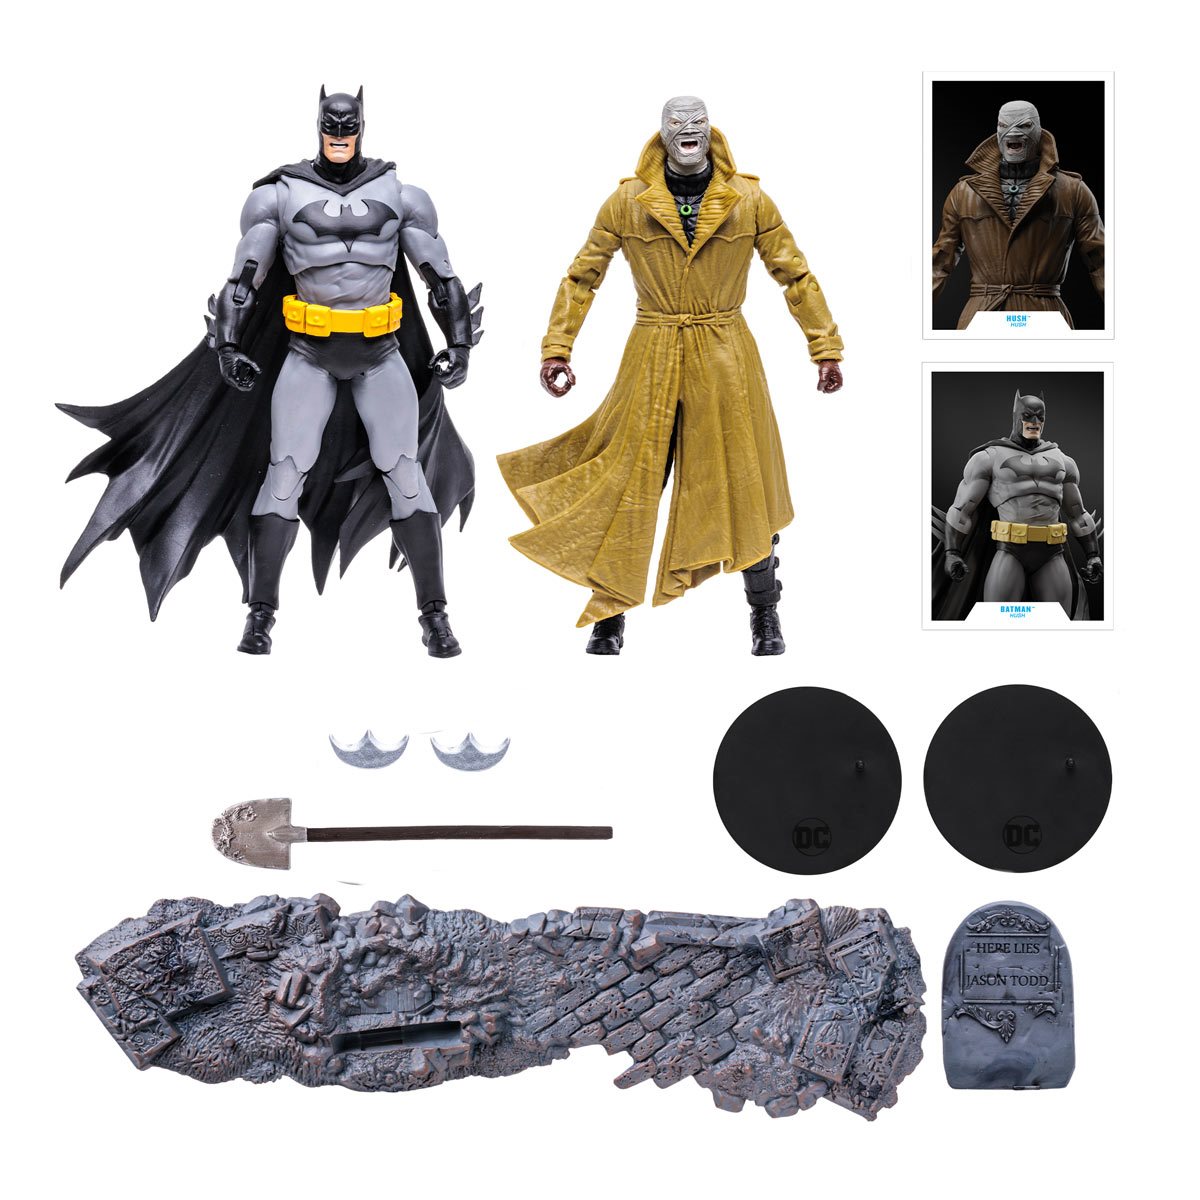 DC Collector Batman Vs Hush Variant Version 7-Inch Scale Action Figure 2- Pack